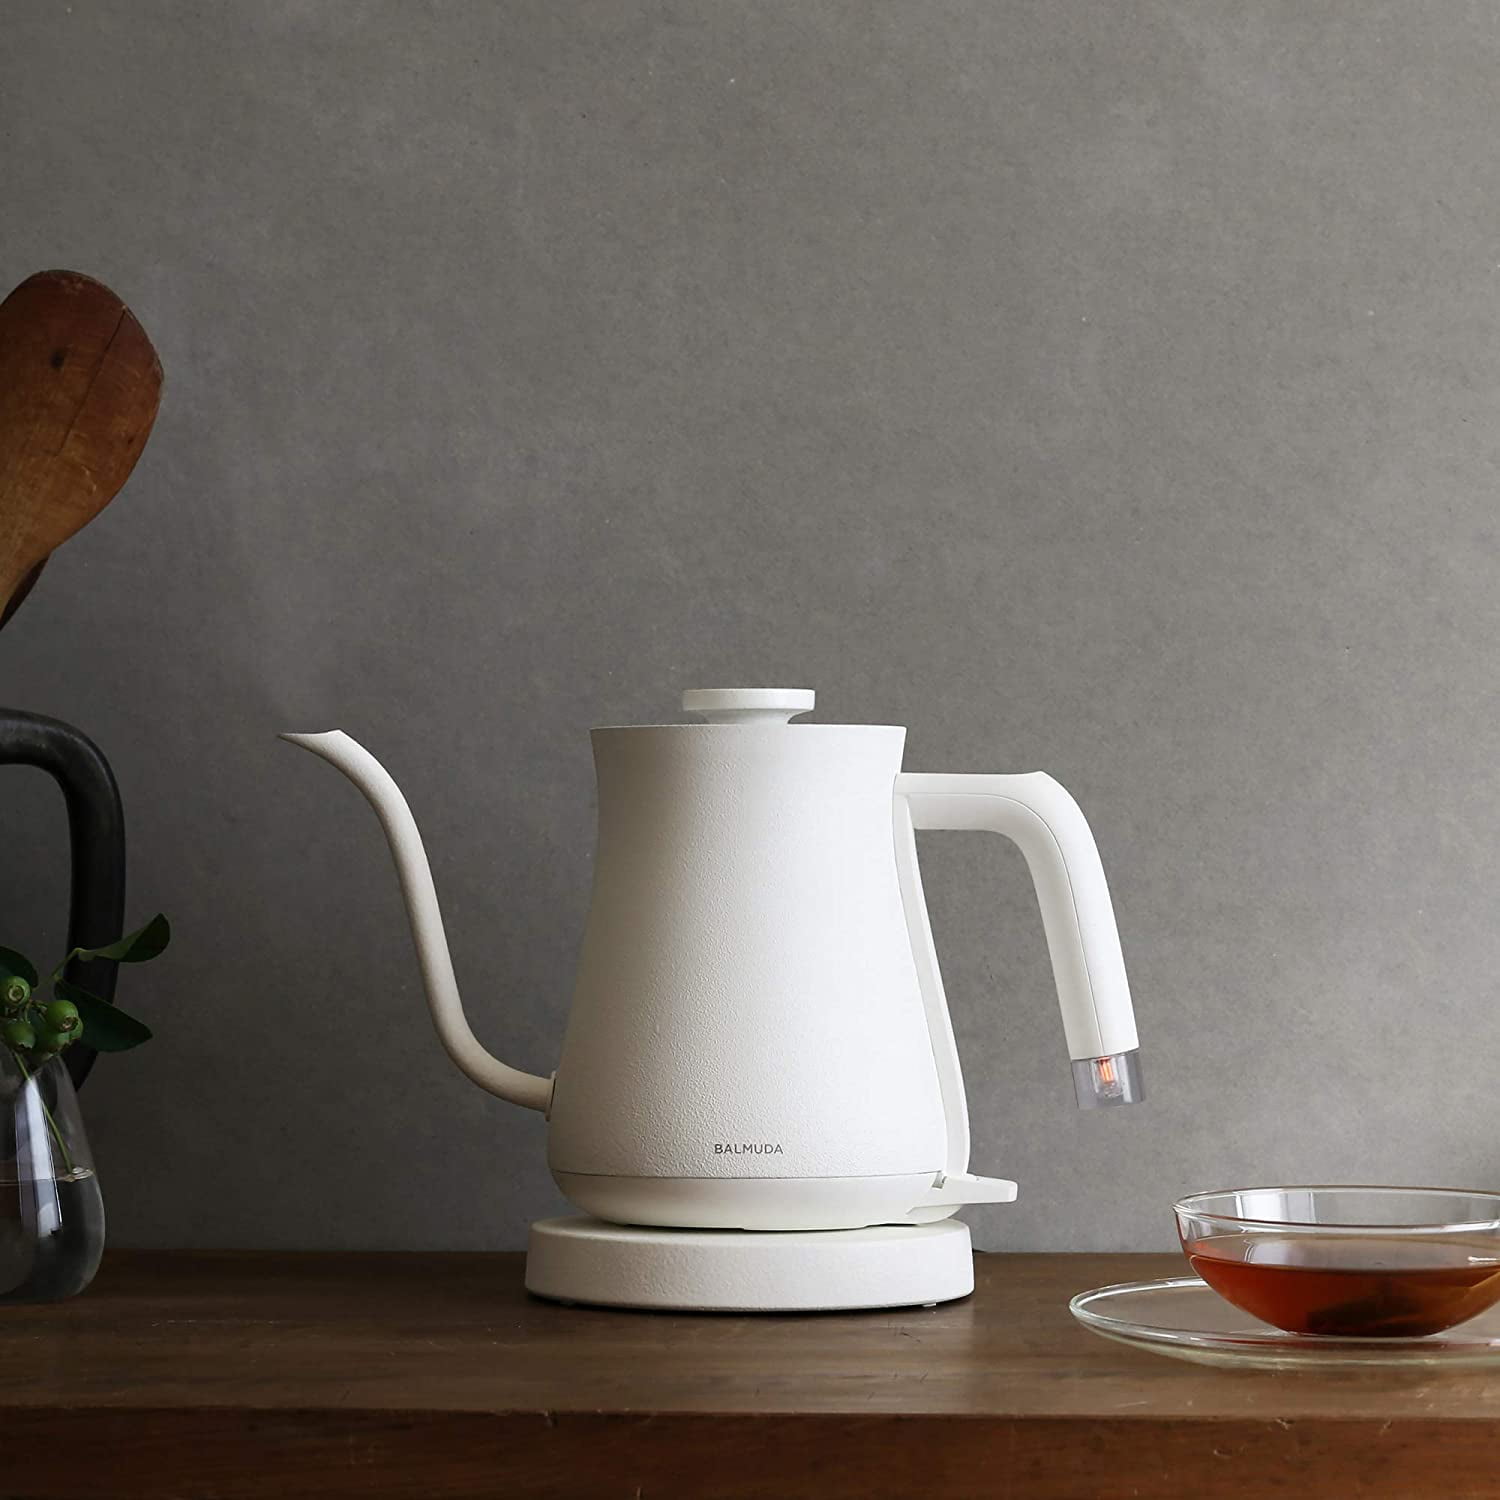 K02A-WH BALMUDA White Electric Kettle The Pot Home Kitchen from